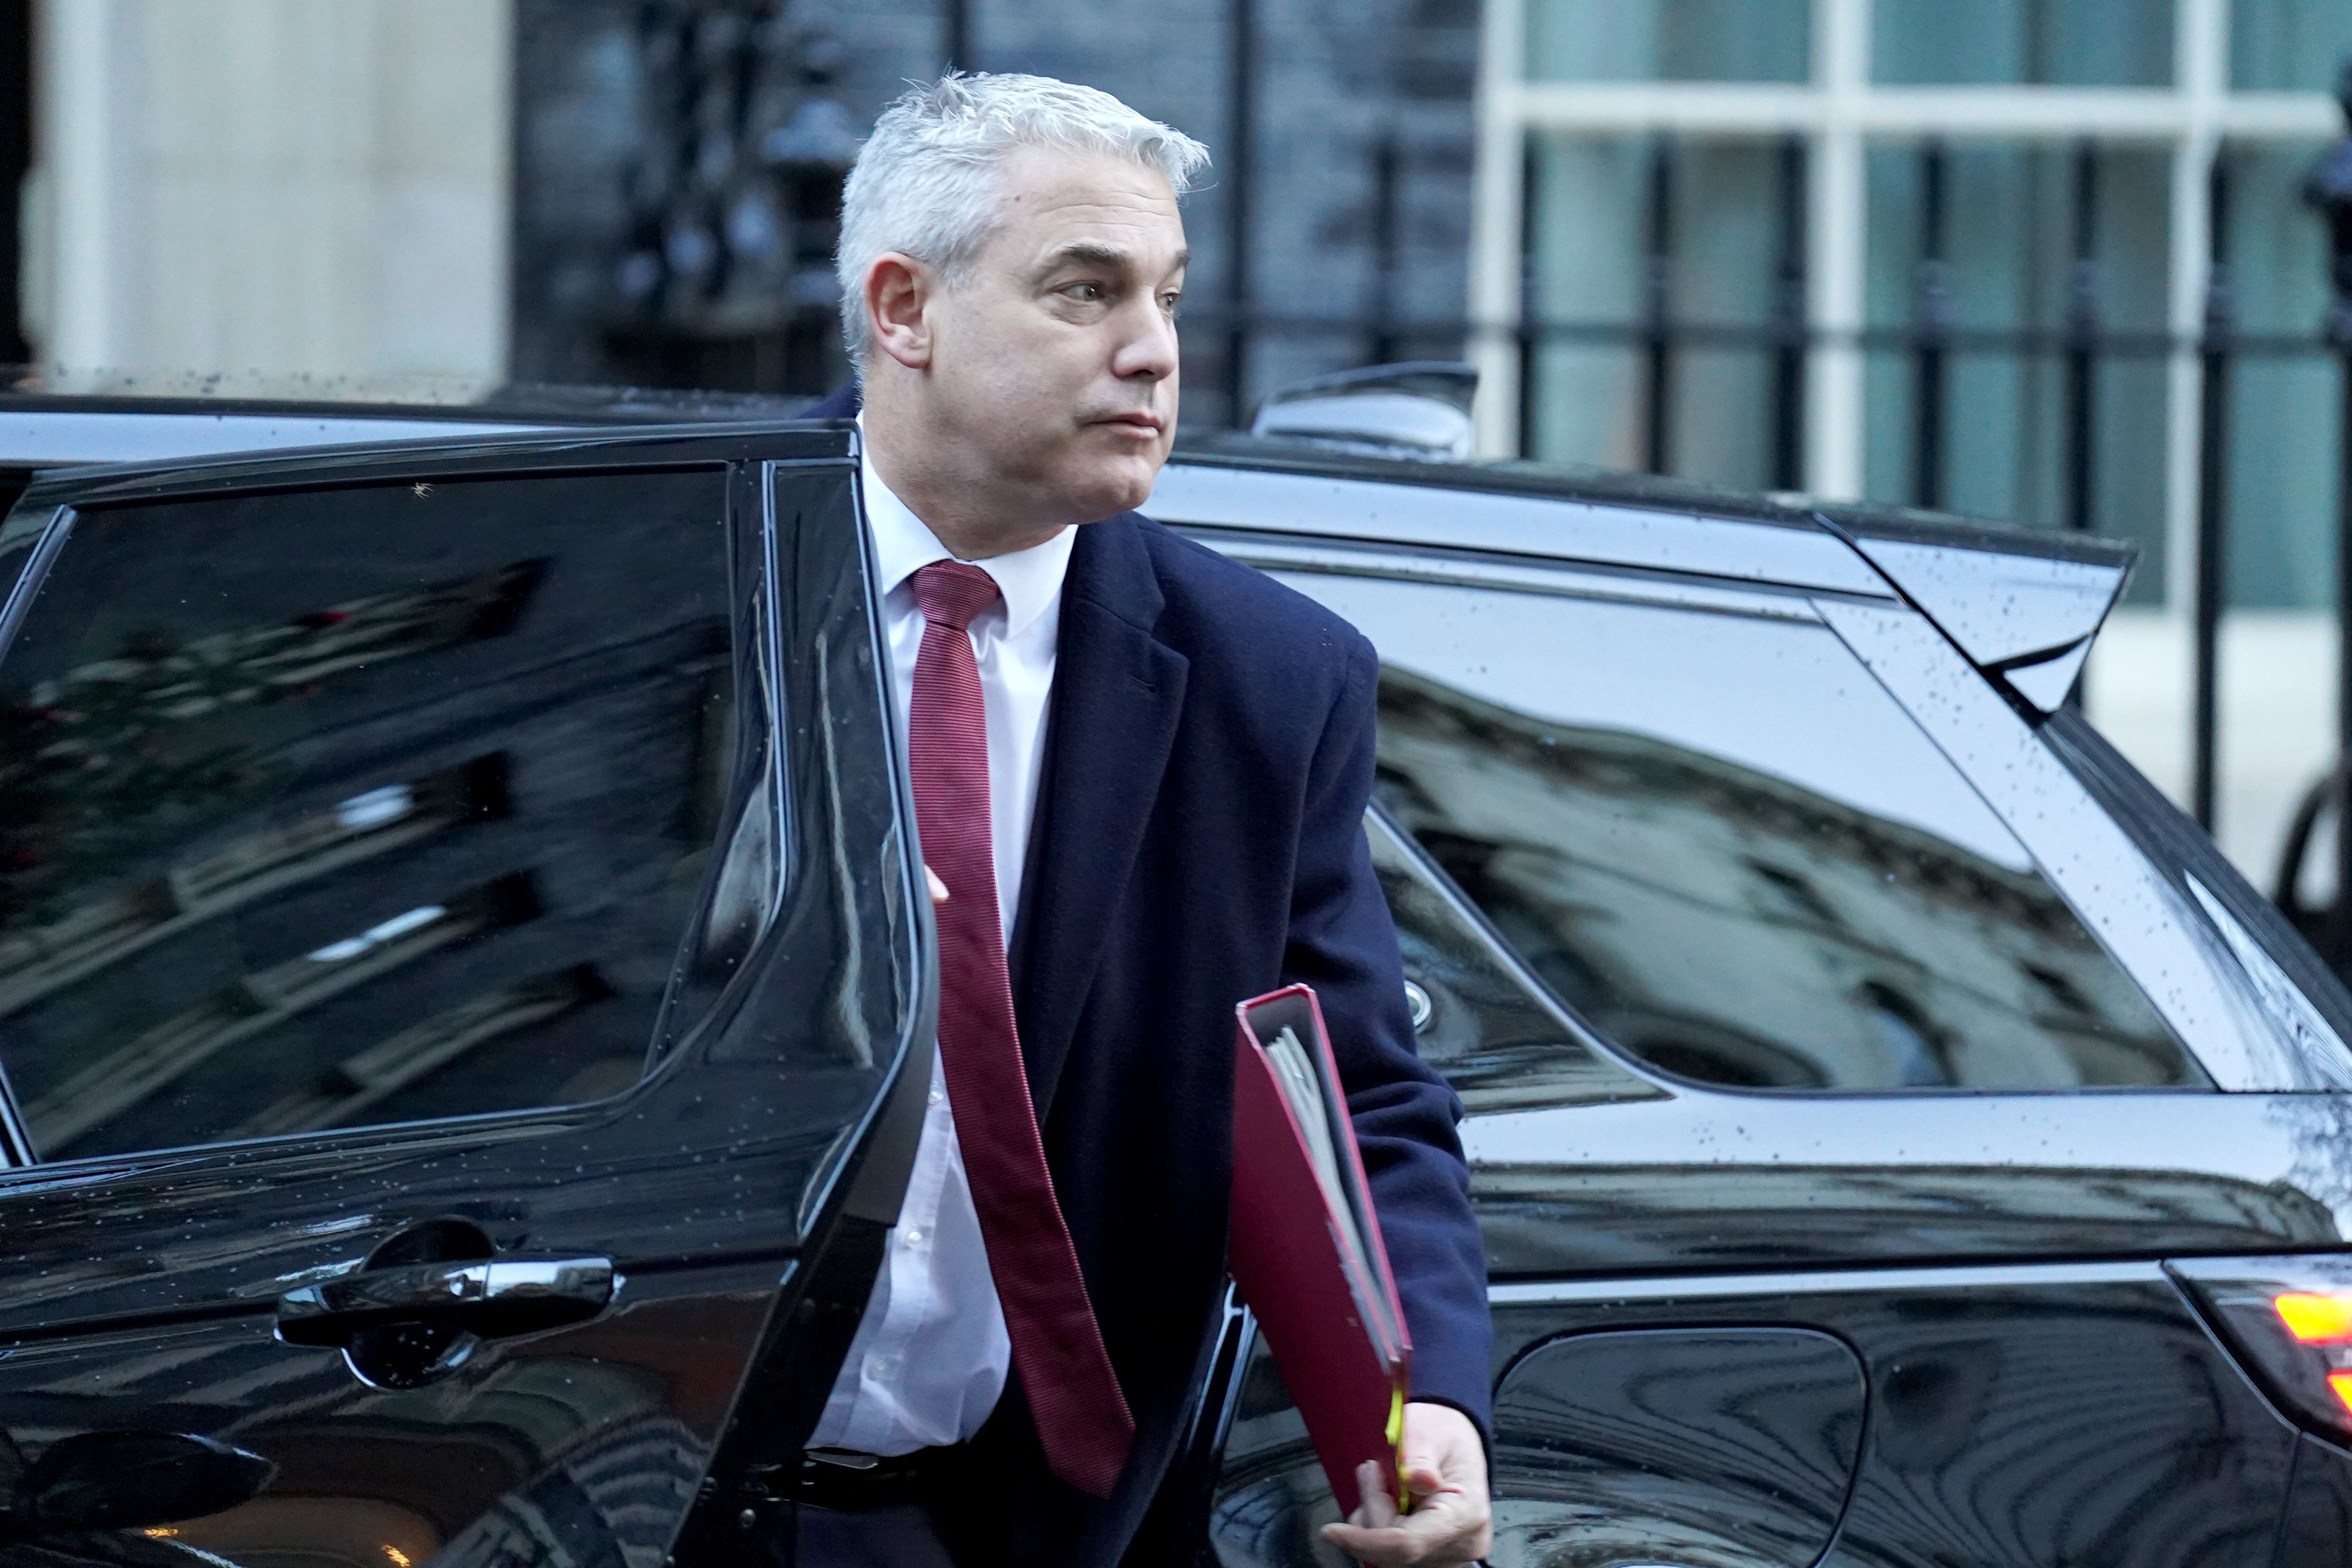 Steve Barclay has urged the public to take “extra care” on Wednesday